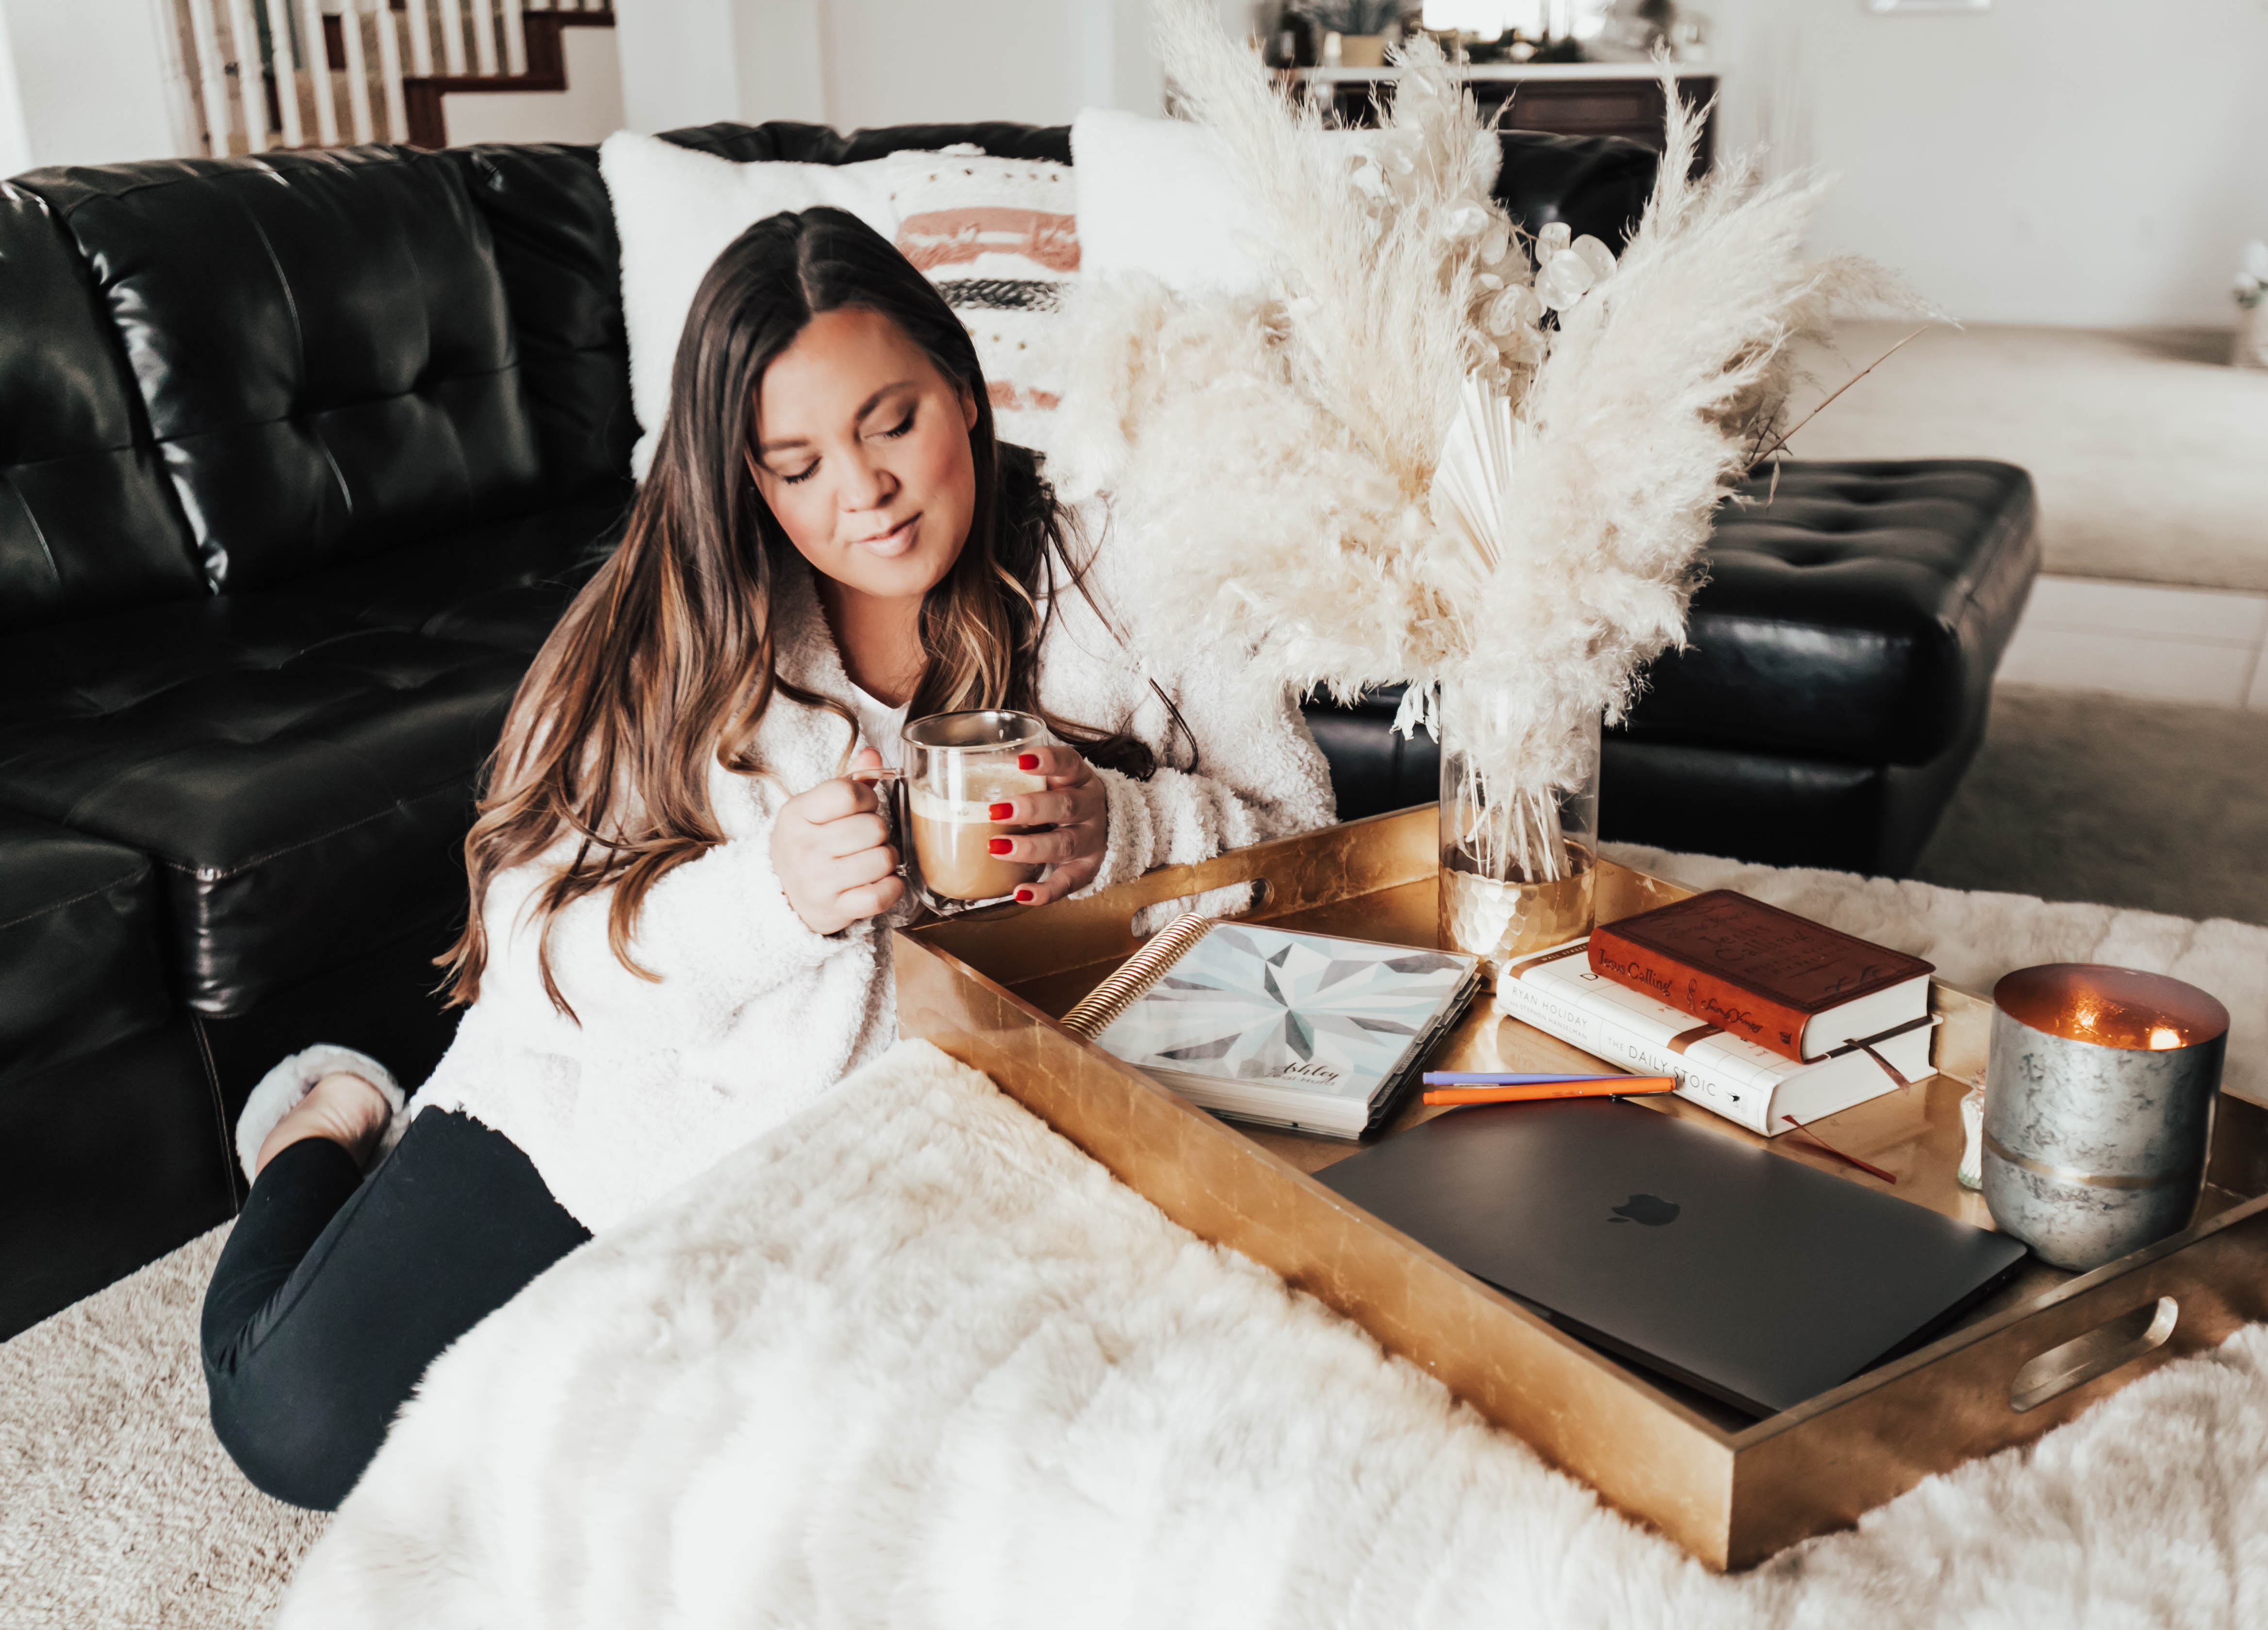 Reno blogger, Ashley Zeal, from Two Peas in a Prada, shares Ashley's morning routine. She gets into specific detail about the exact things she does every single morning to set her up for a successful day.